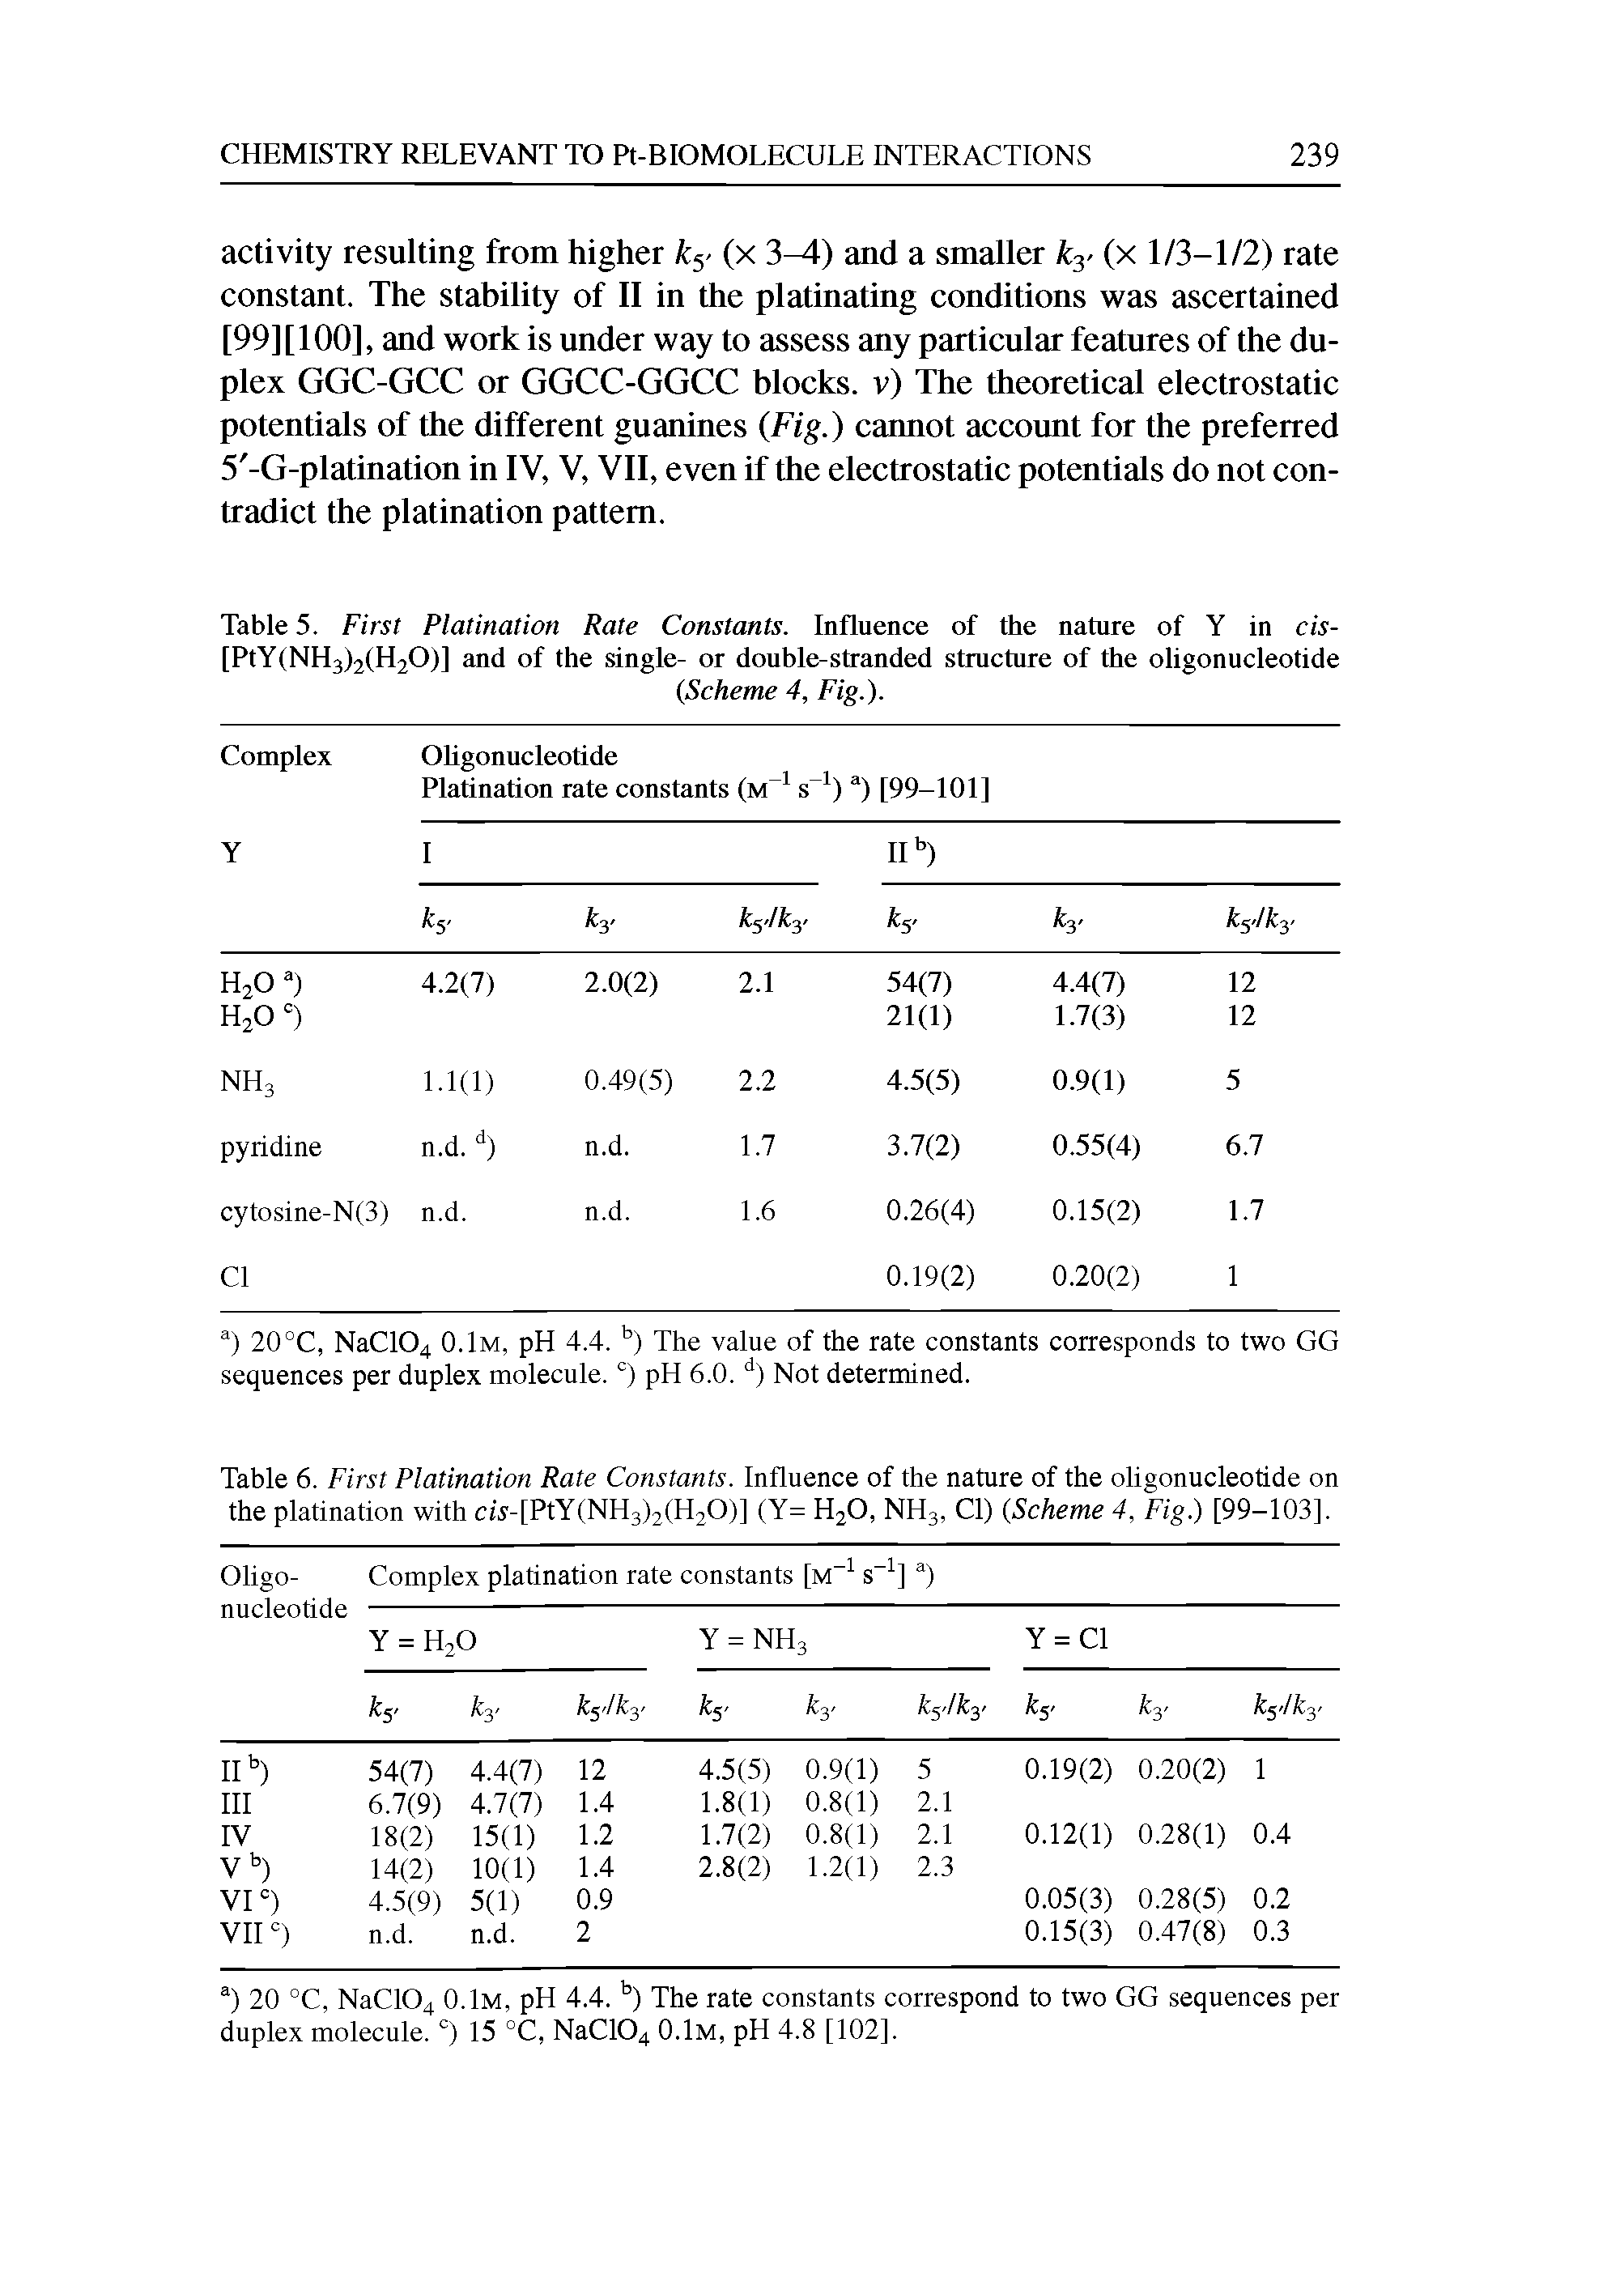 Table 5. First Platination Rate Constants. Influence of the nature of Y in cis-[PtY(NH3)2(H20)] and of the single- or double-stranded structure of the oligonucleotide...